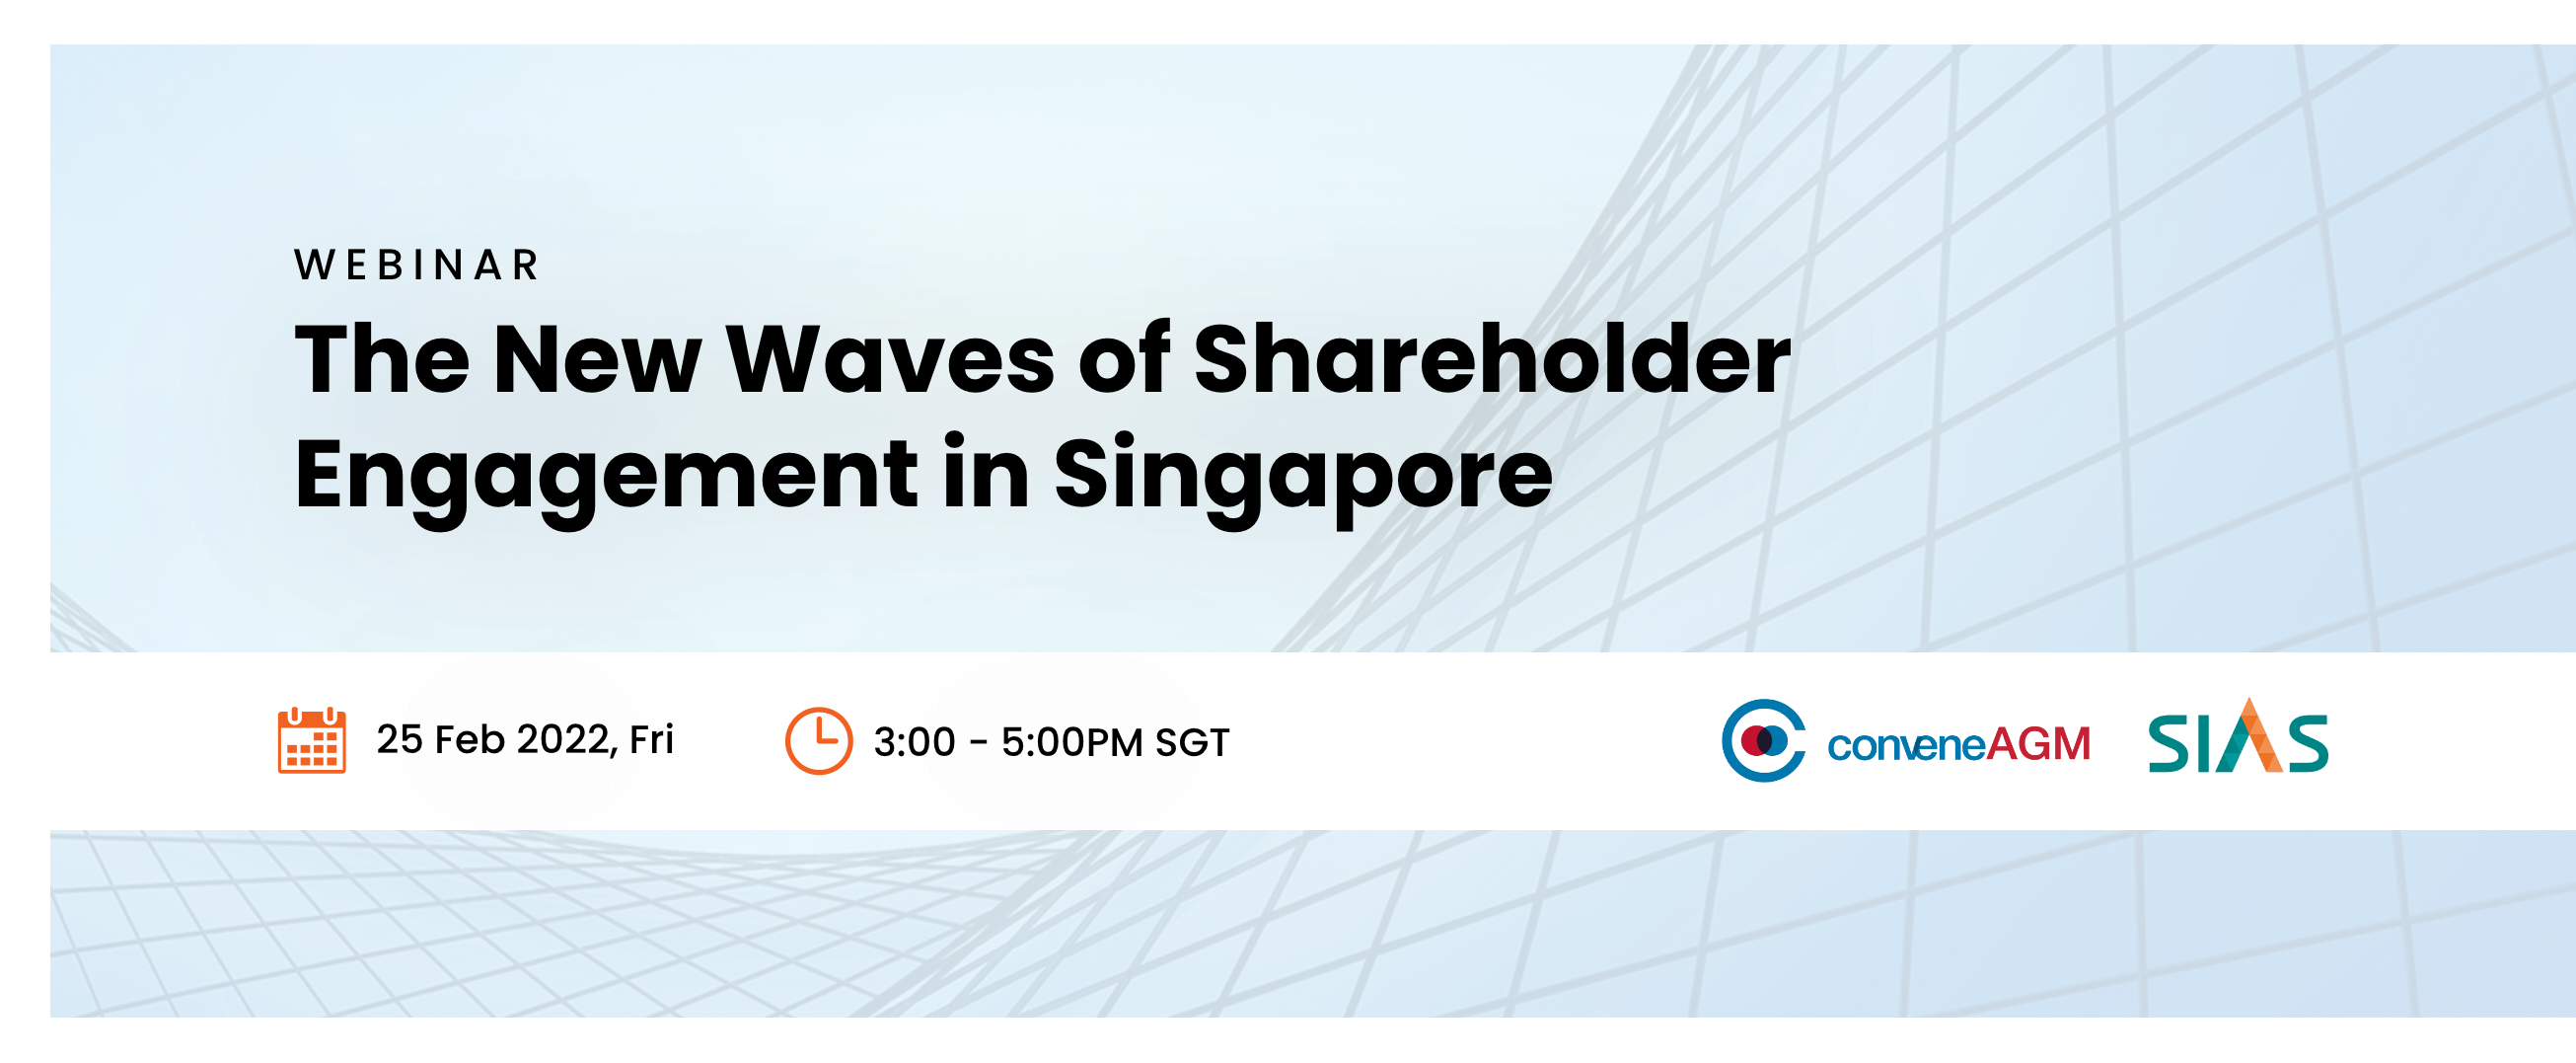 The New Waves of Shareholder Engagement in Singapore